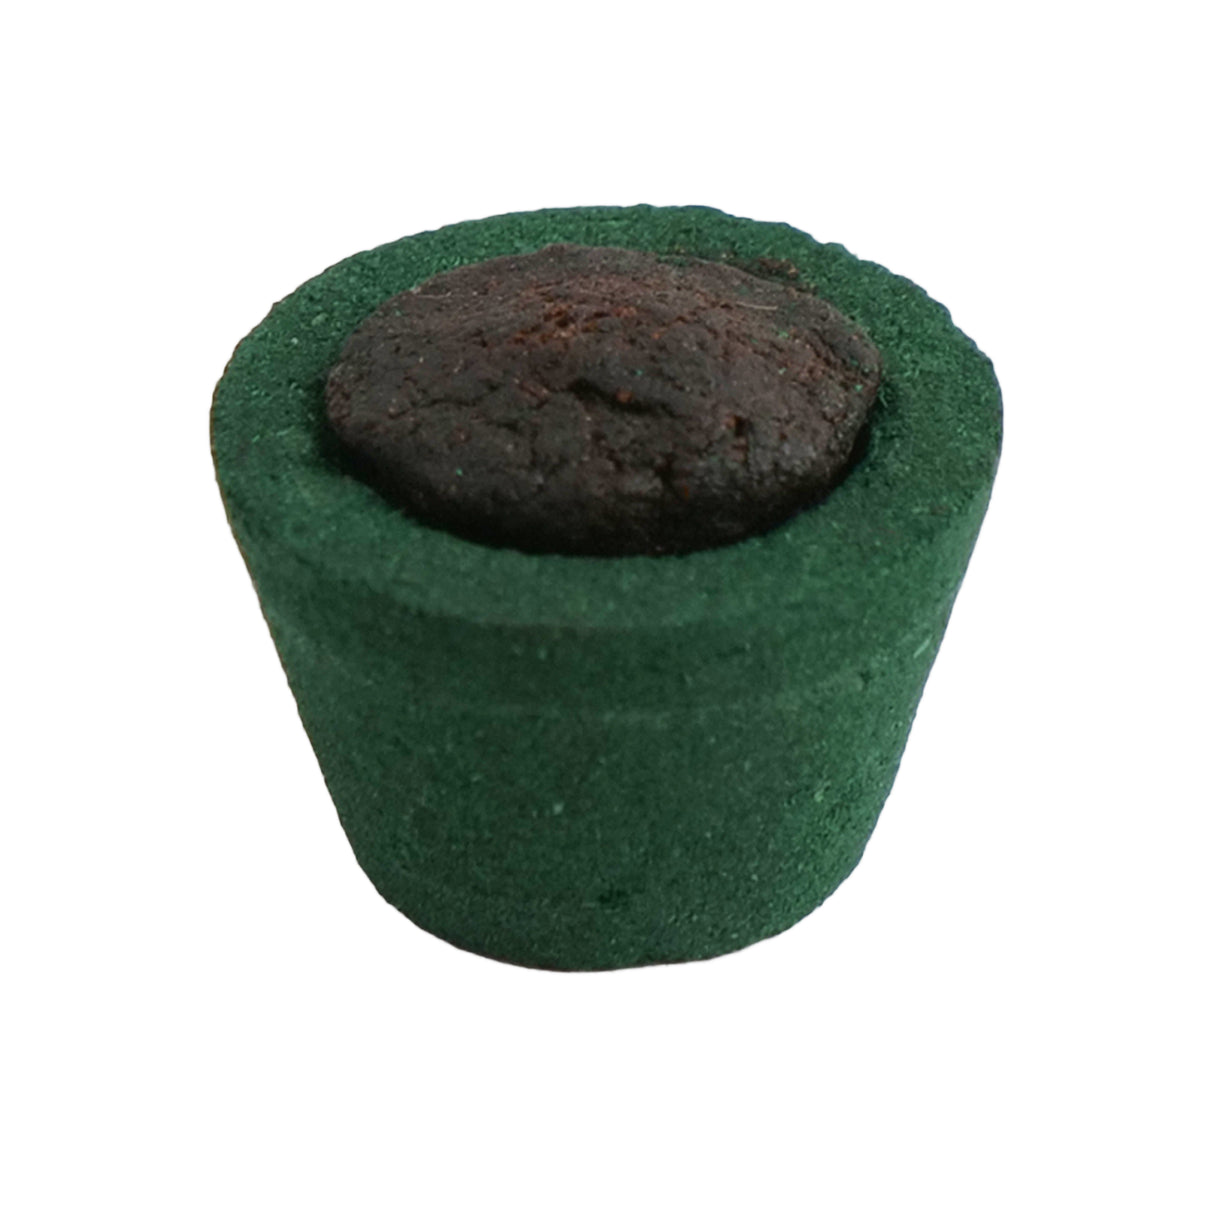 MOSCUP - Herbal Sambrani Cups | Pack of 6 Cups